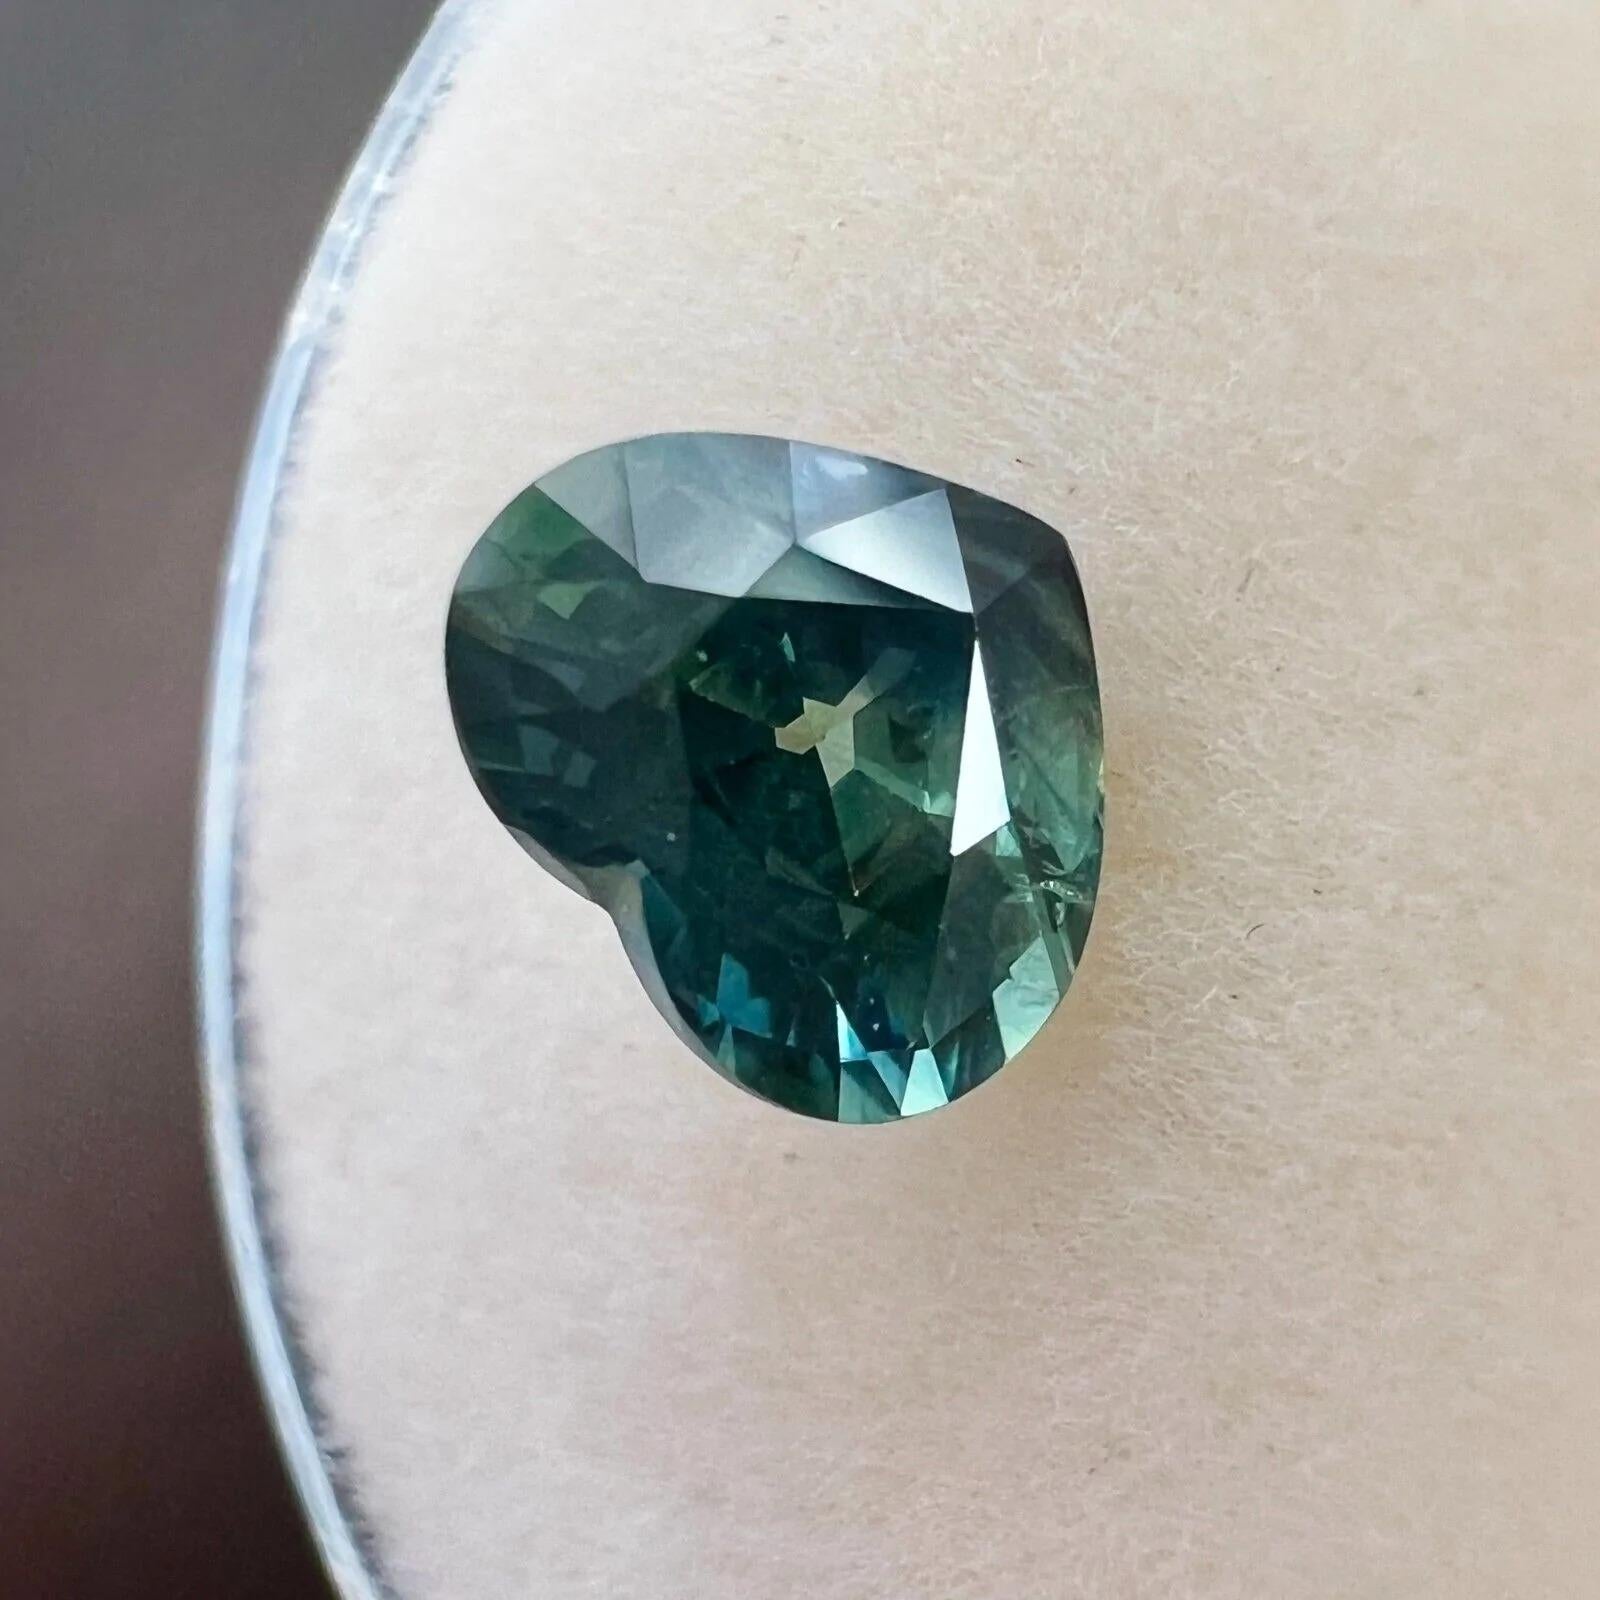 Fine 1.20ct Australian Vivid Green Blue Sapphire Heart Cut Rare Gem 6.7x5.5mm

Natural Green Blue Australian Sapphire Gem.
1.20 Carat with a beautiful vivid green blue colour. Has very good clarity, a very clean stone with only some small natural